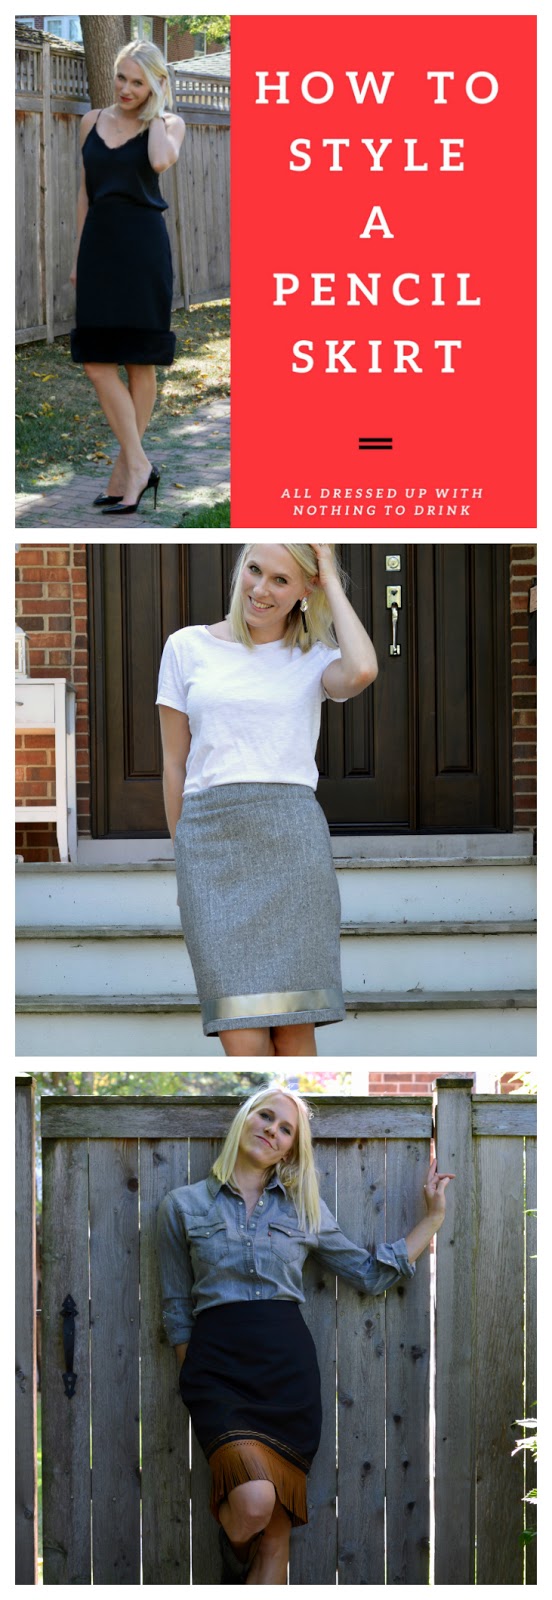 How to Style a Pencil Skirt- All Dressed Up with Nothing to Drink